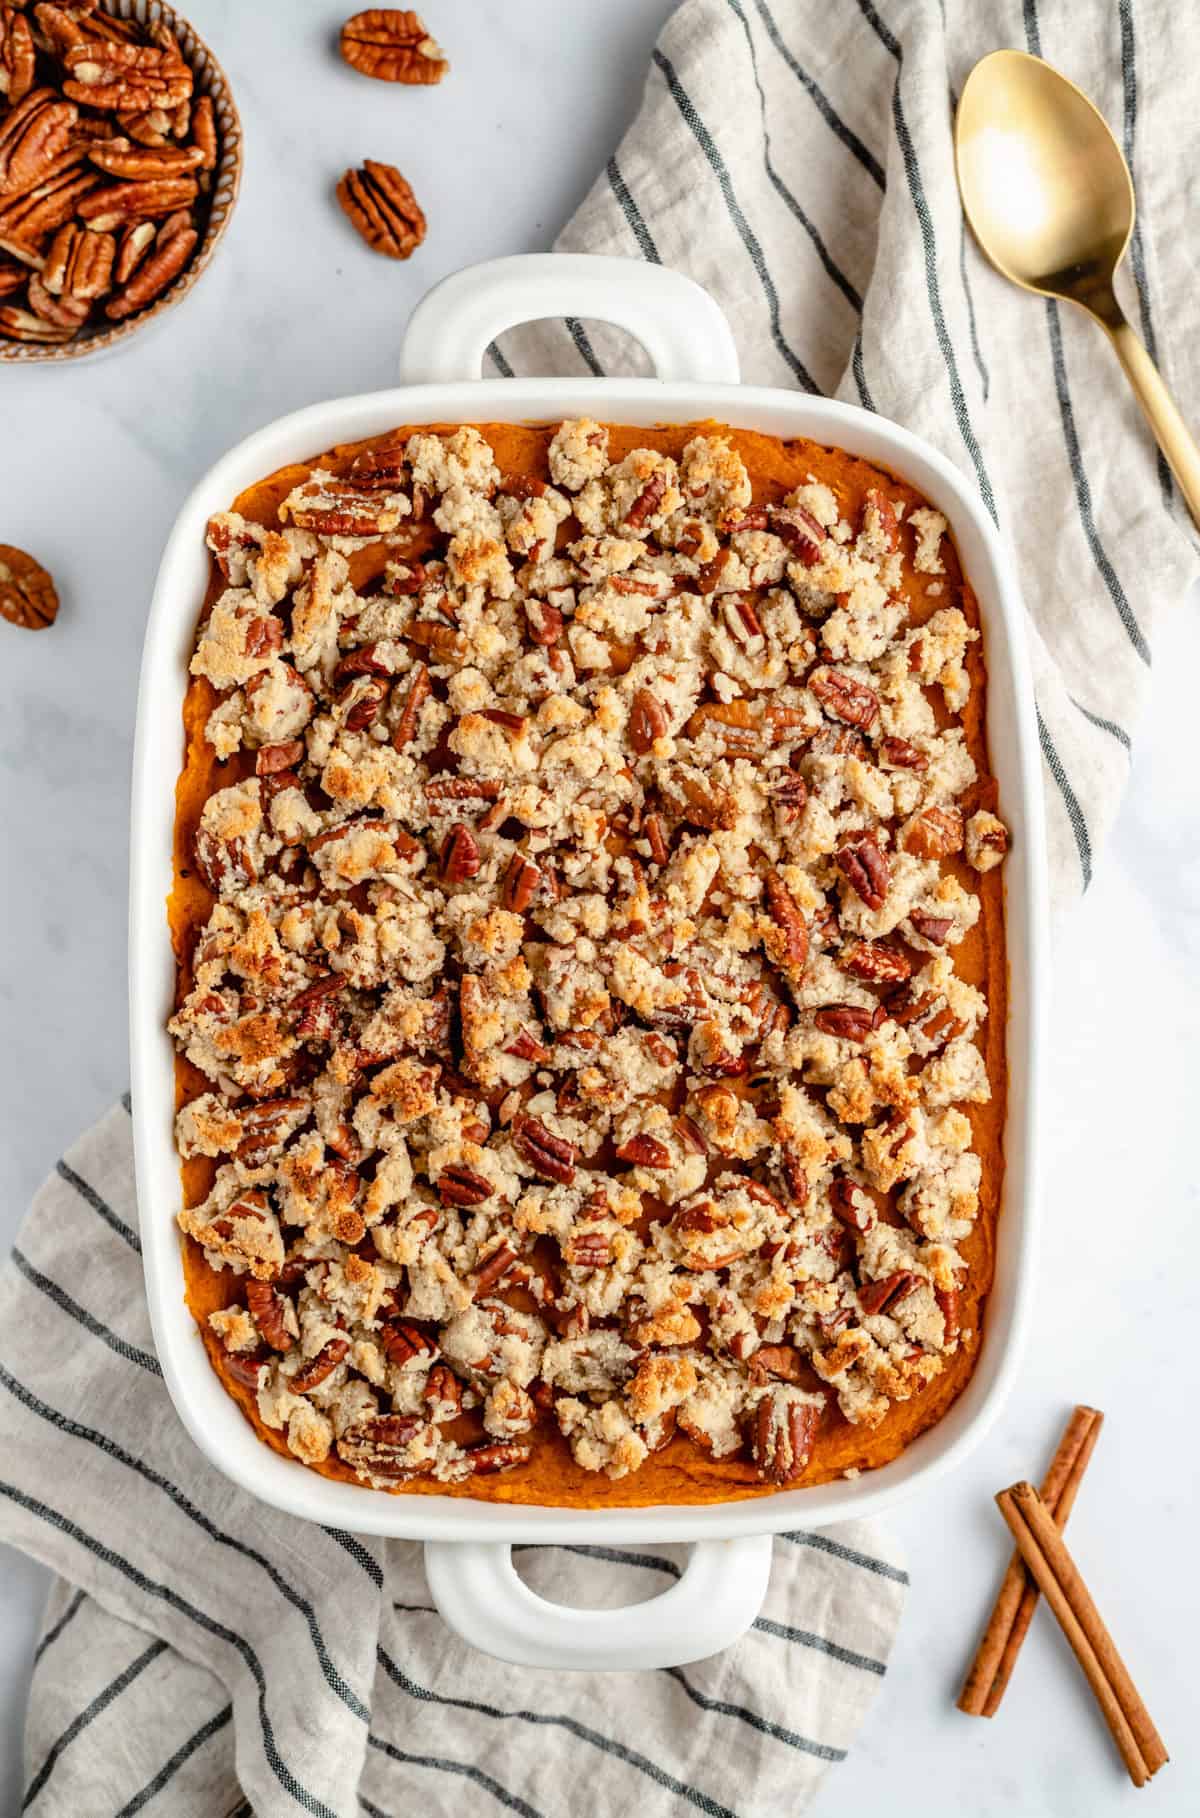 Sweet potato casserole on a striped kitchen towel surround by ingredients and a gold spoon.